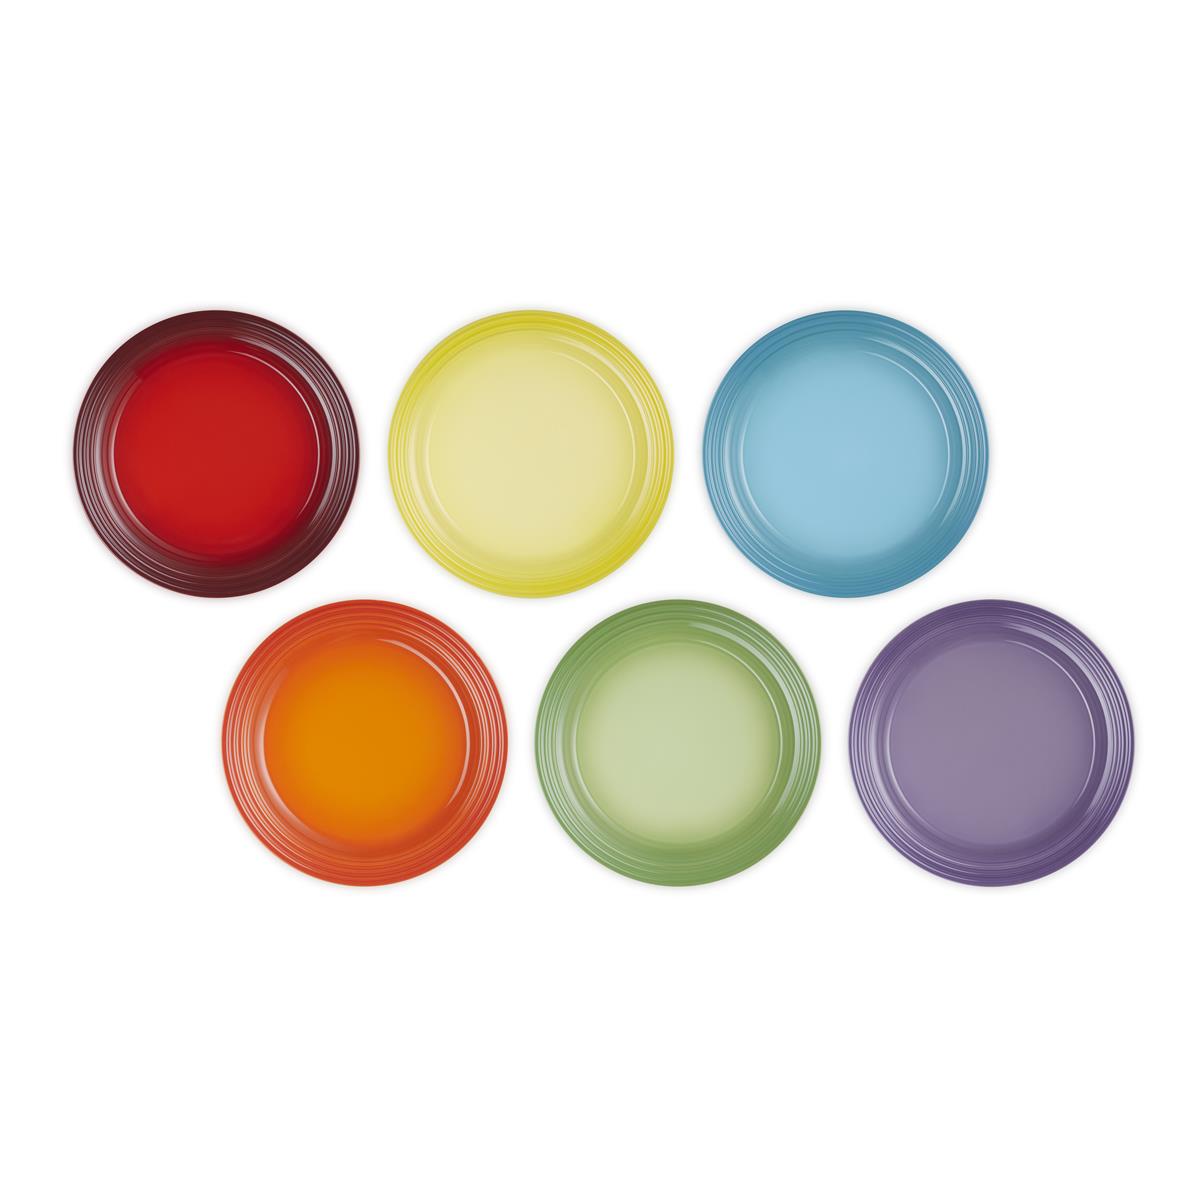 Are the Le Creuset Rainbow Dinner Plates dishwasher safe?